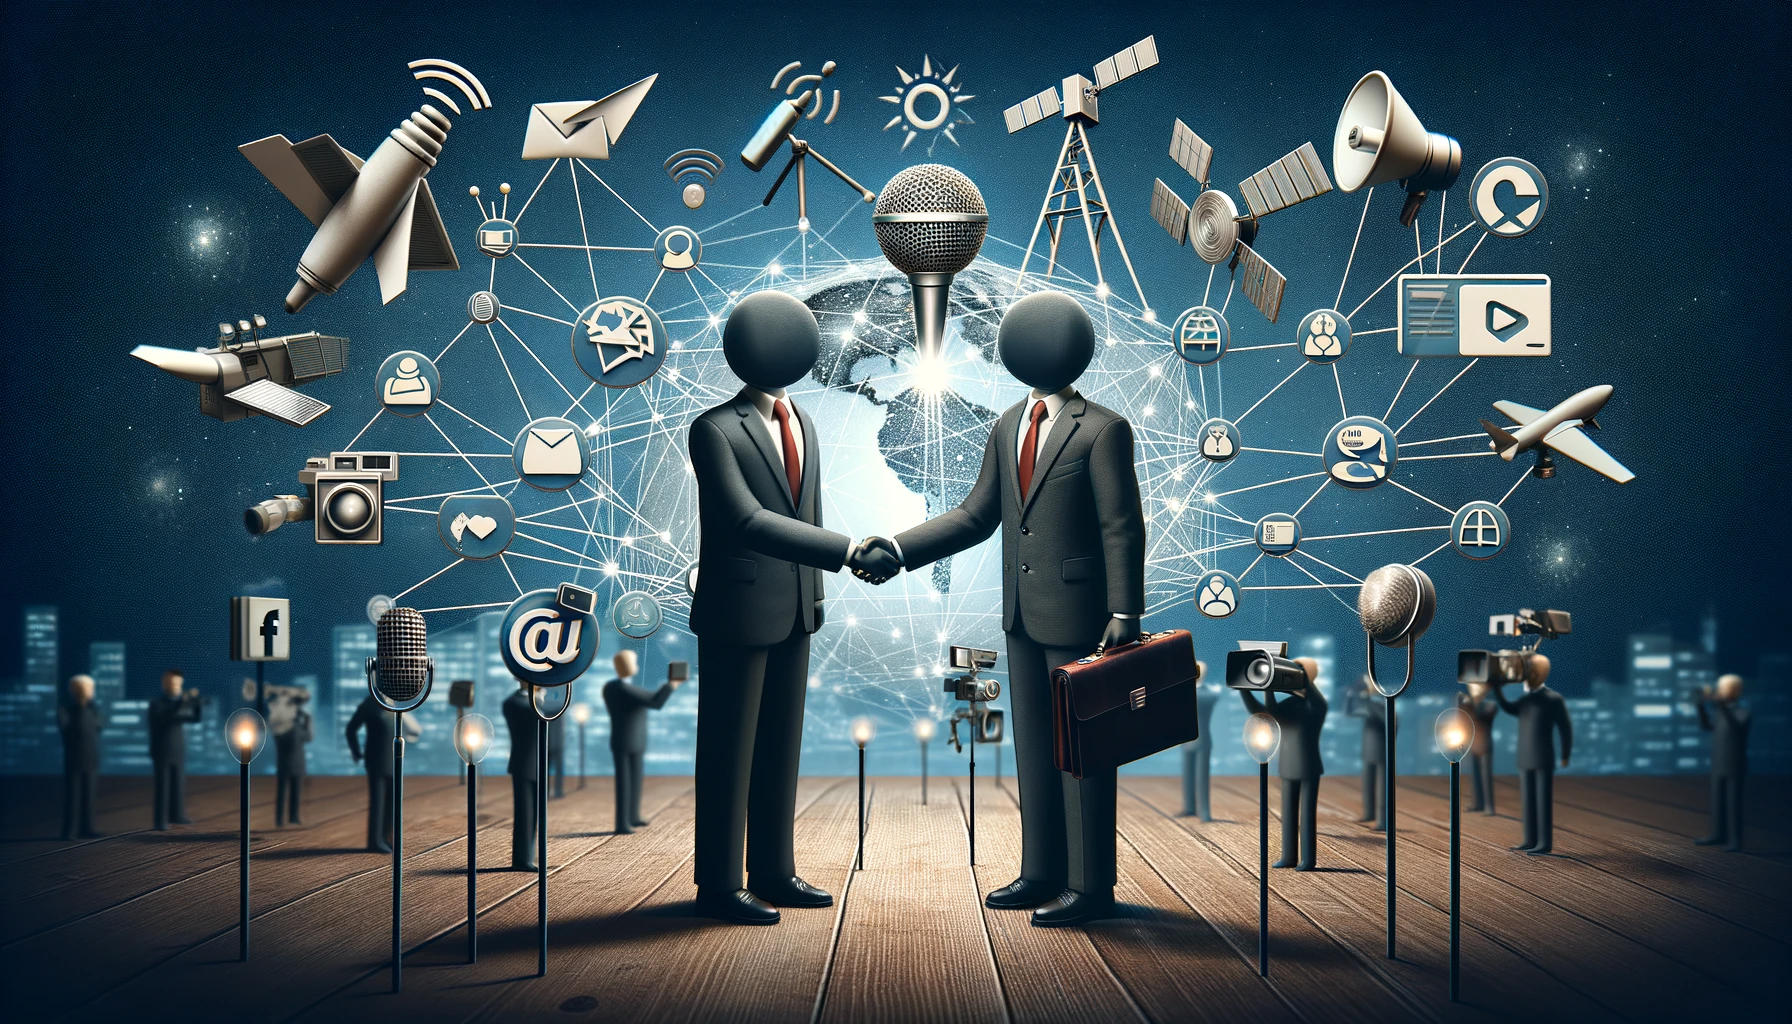 Symbolic handshake between business and media representatives against a backdrop of communication networks and social media icons, illustrating Media Relations Strategies.